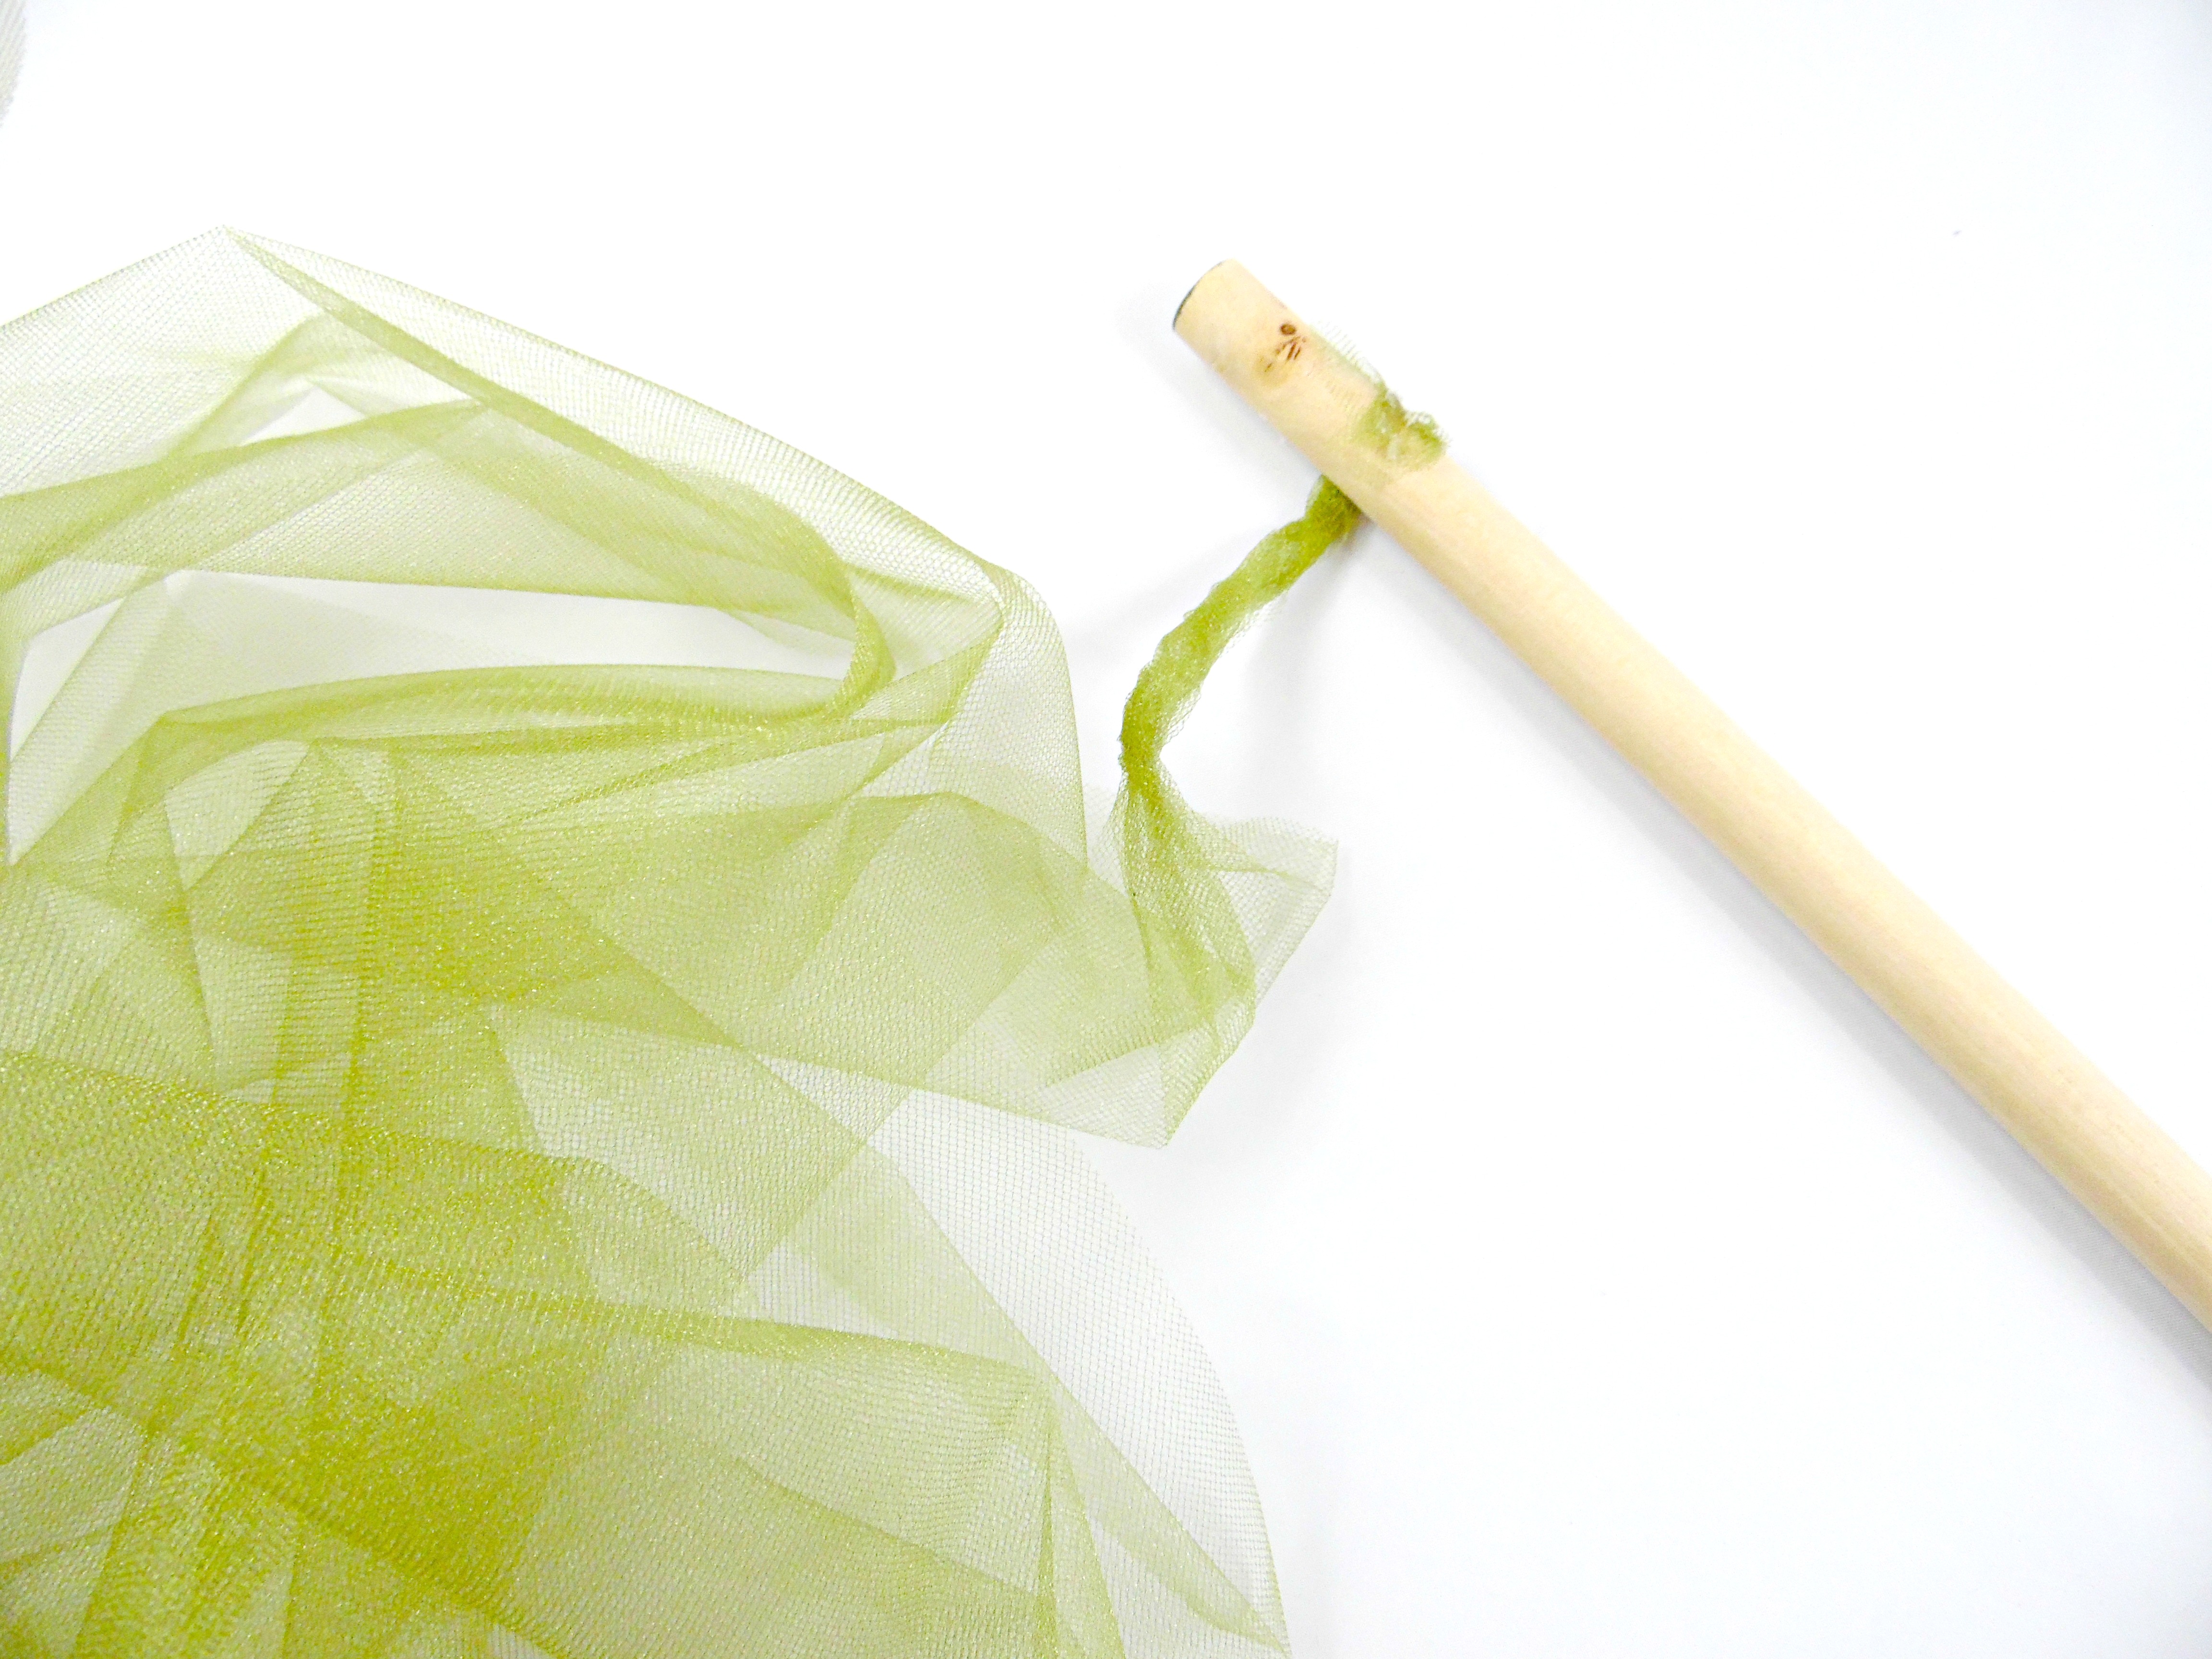 Start wrapping the wooden dowel rod with the green tulle fabric about an inch from the end of the dowel. The tulle is glued in place and twisted to create a whimsical, textured flower stem.